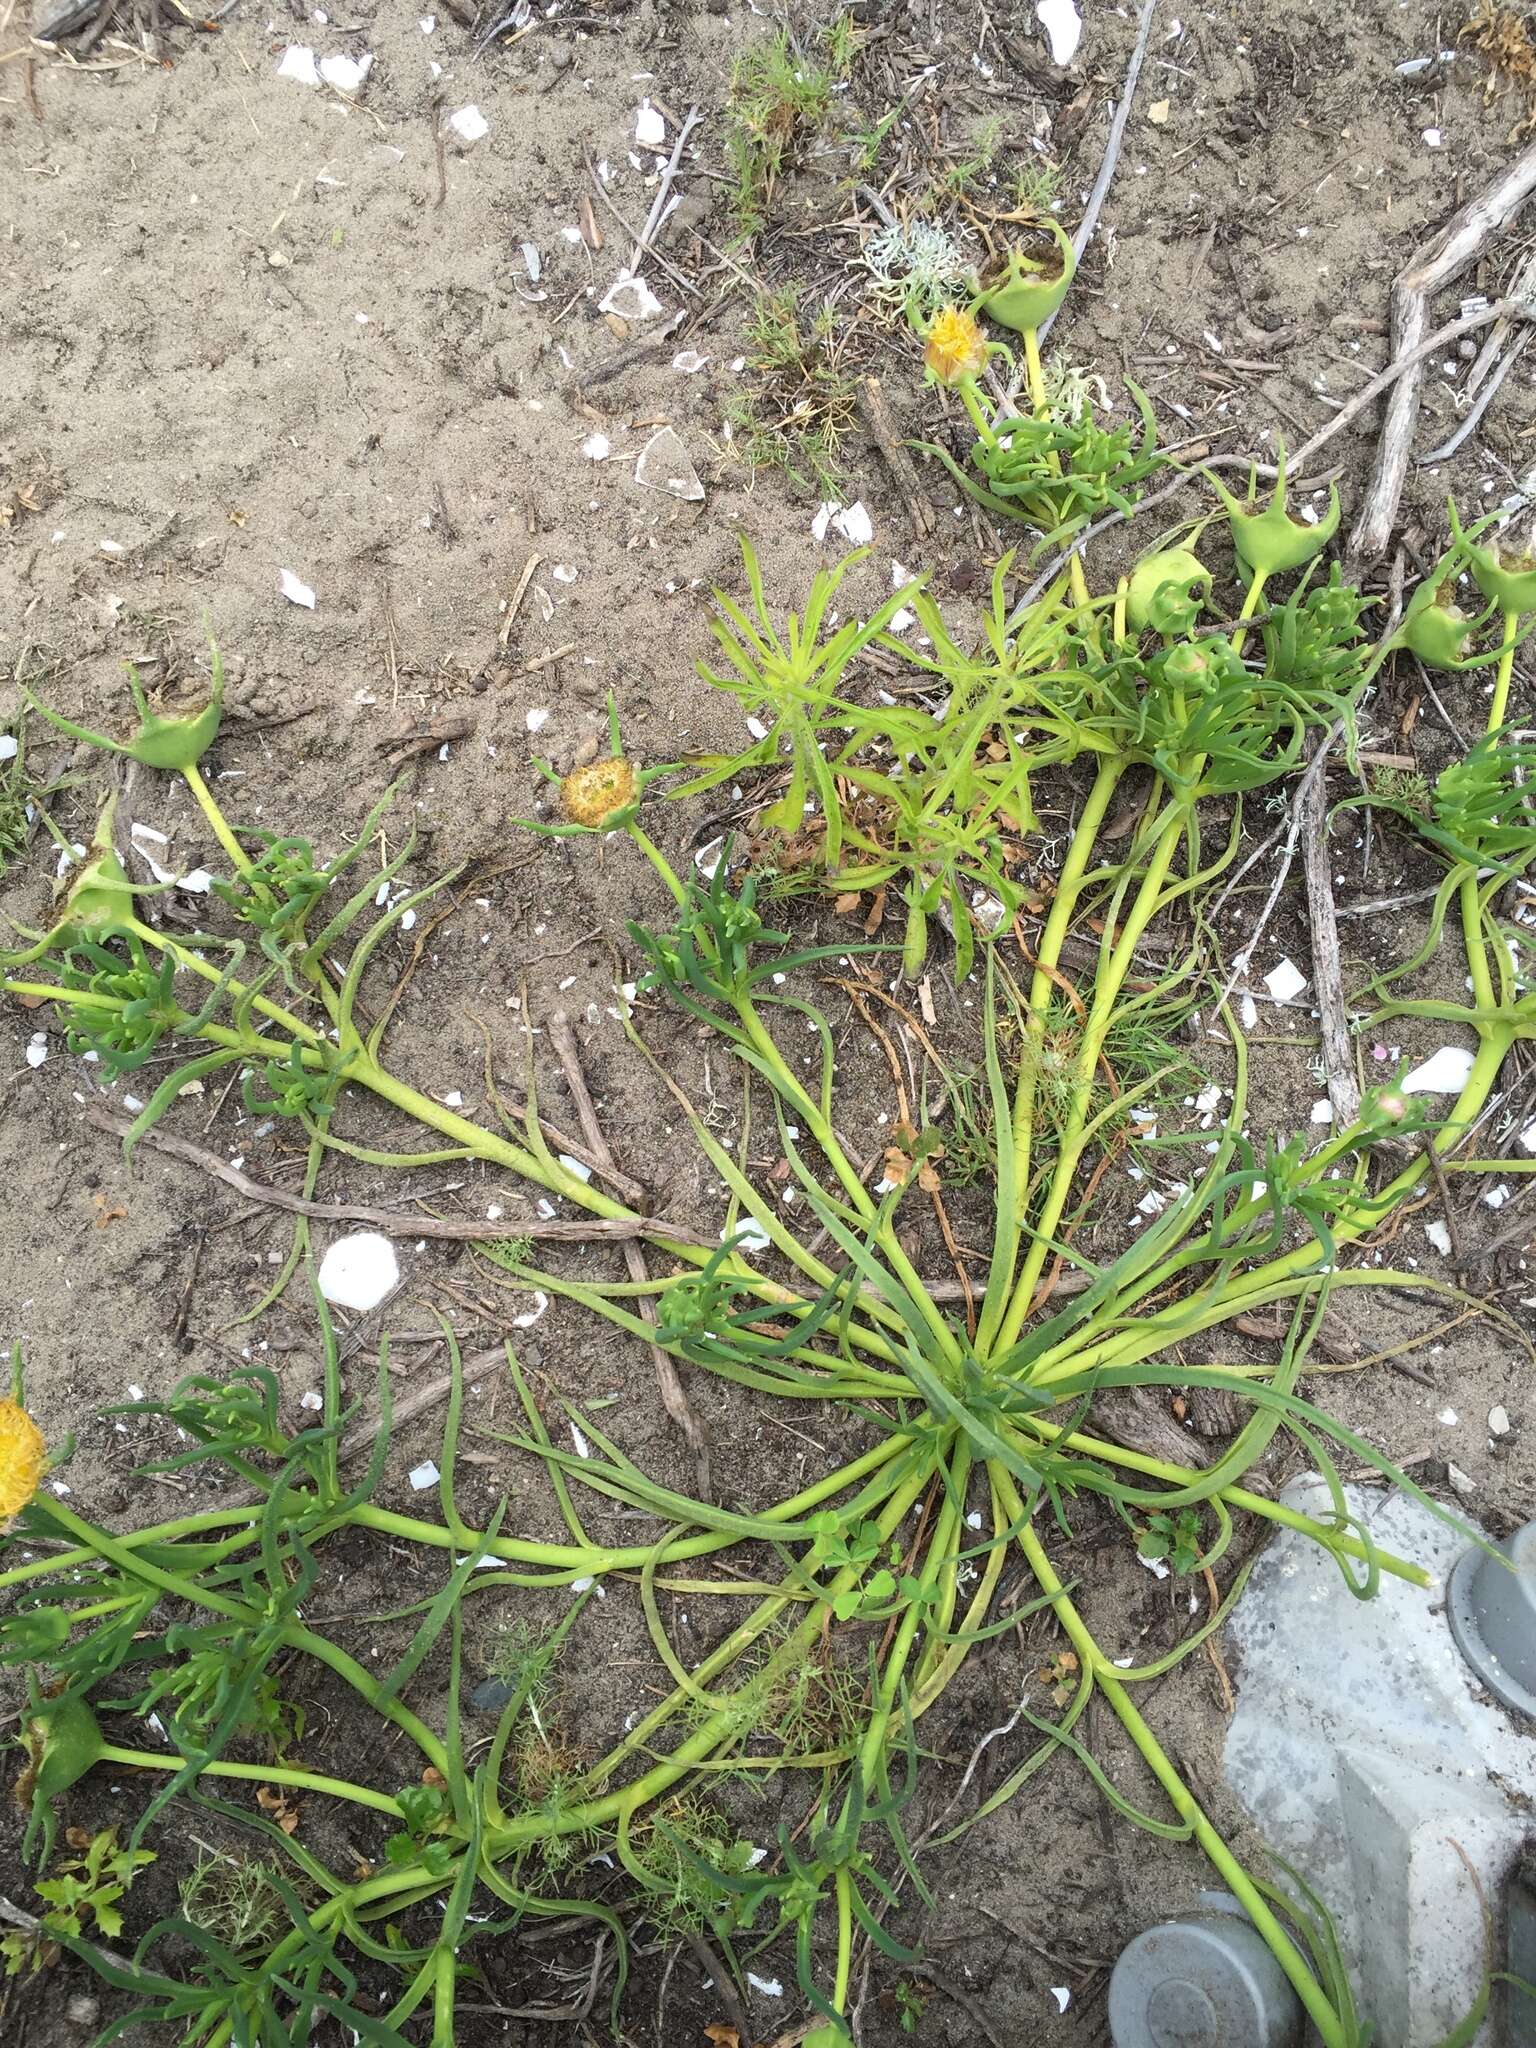 Image of narrow-leaved iceplant